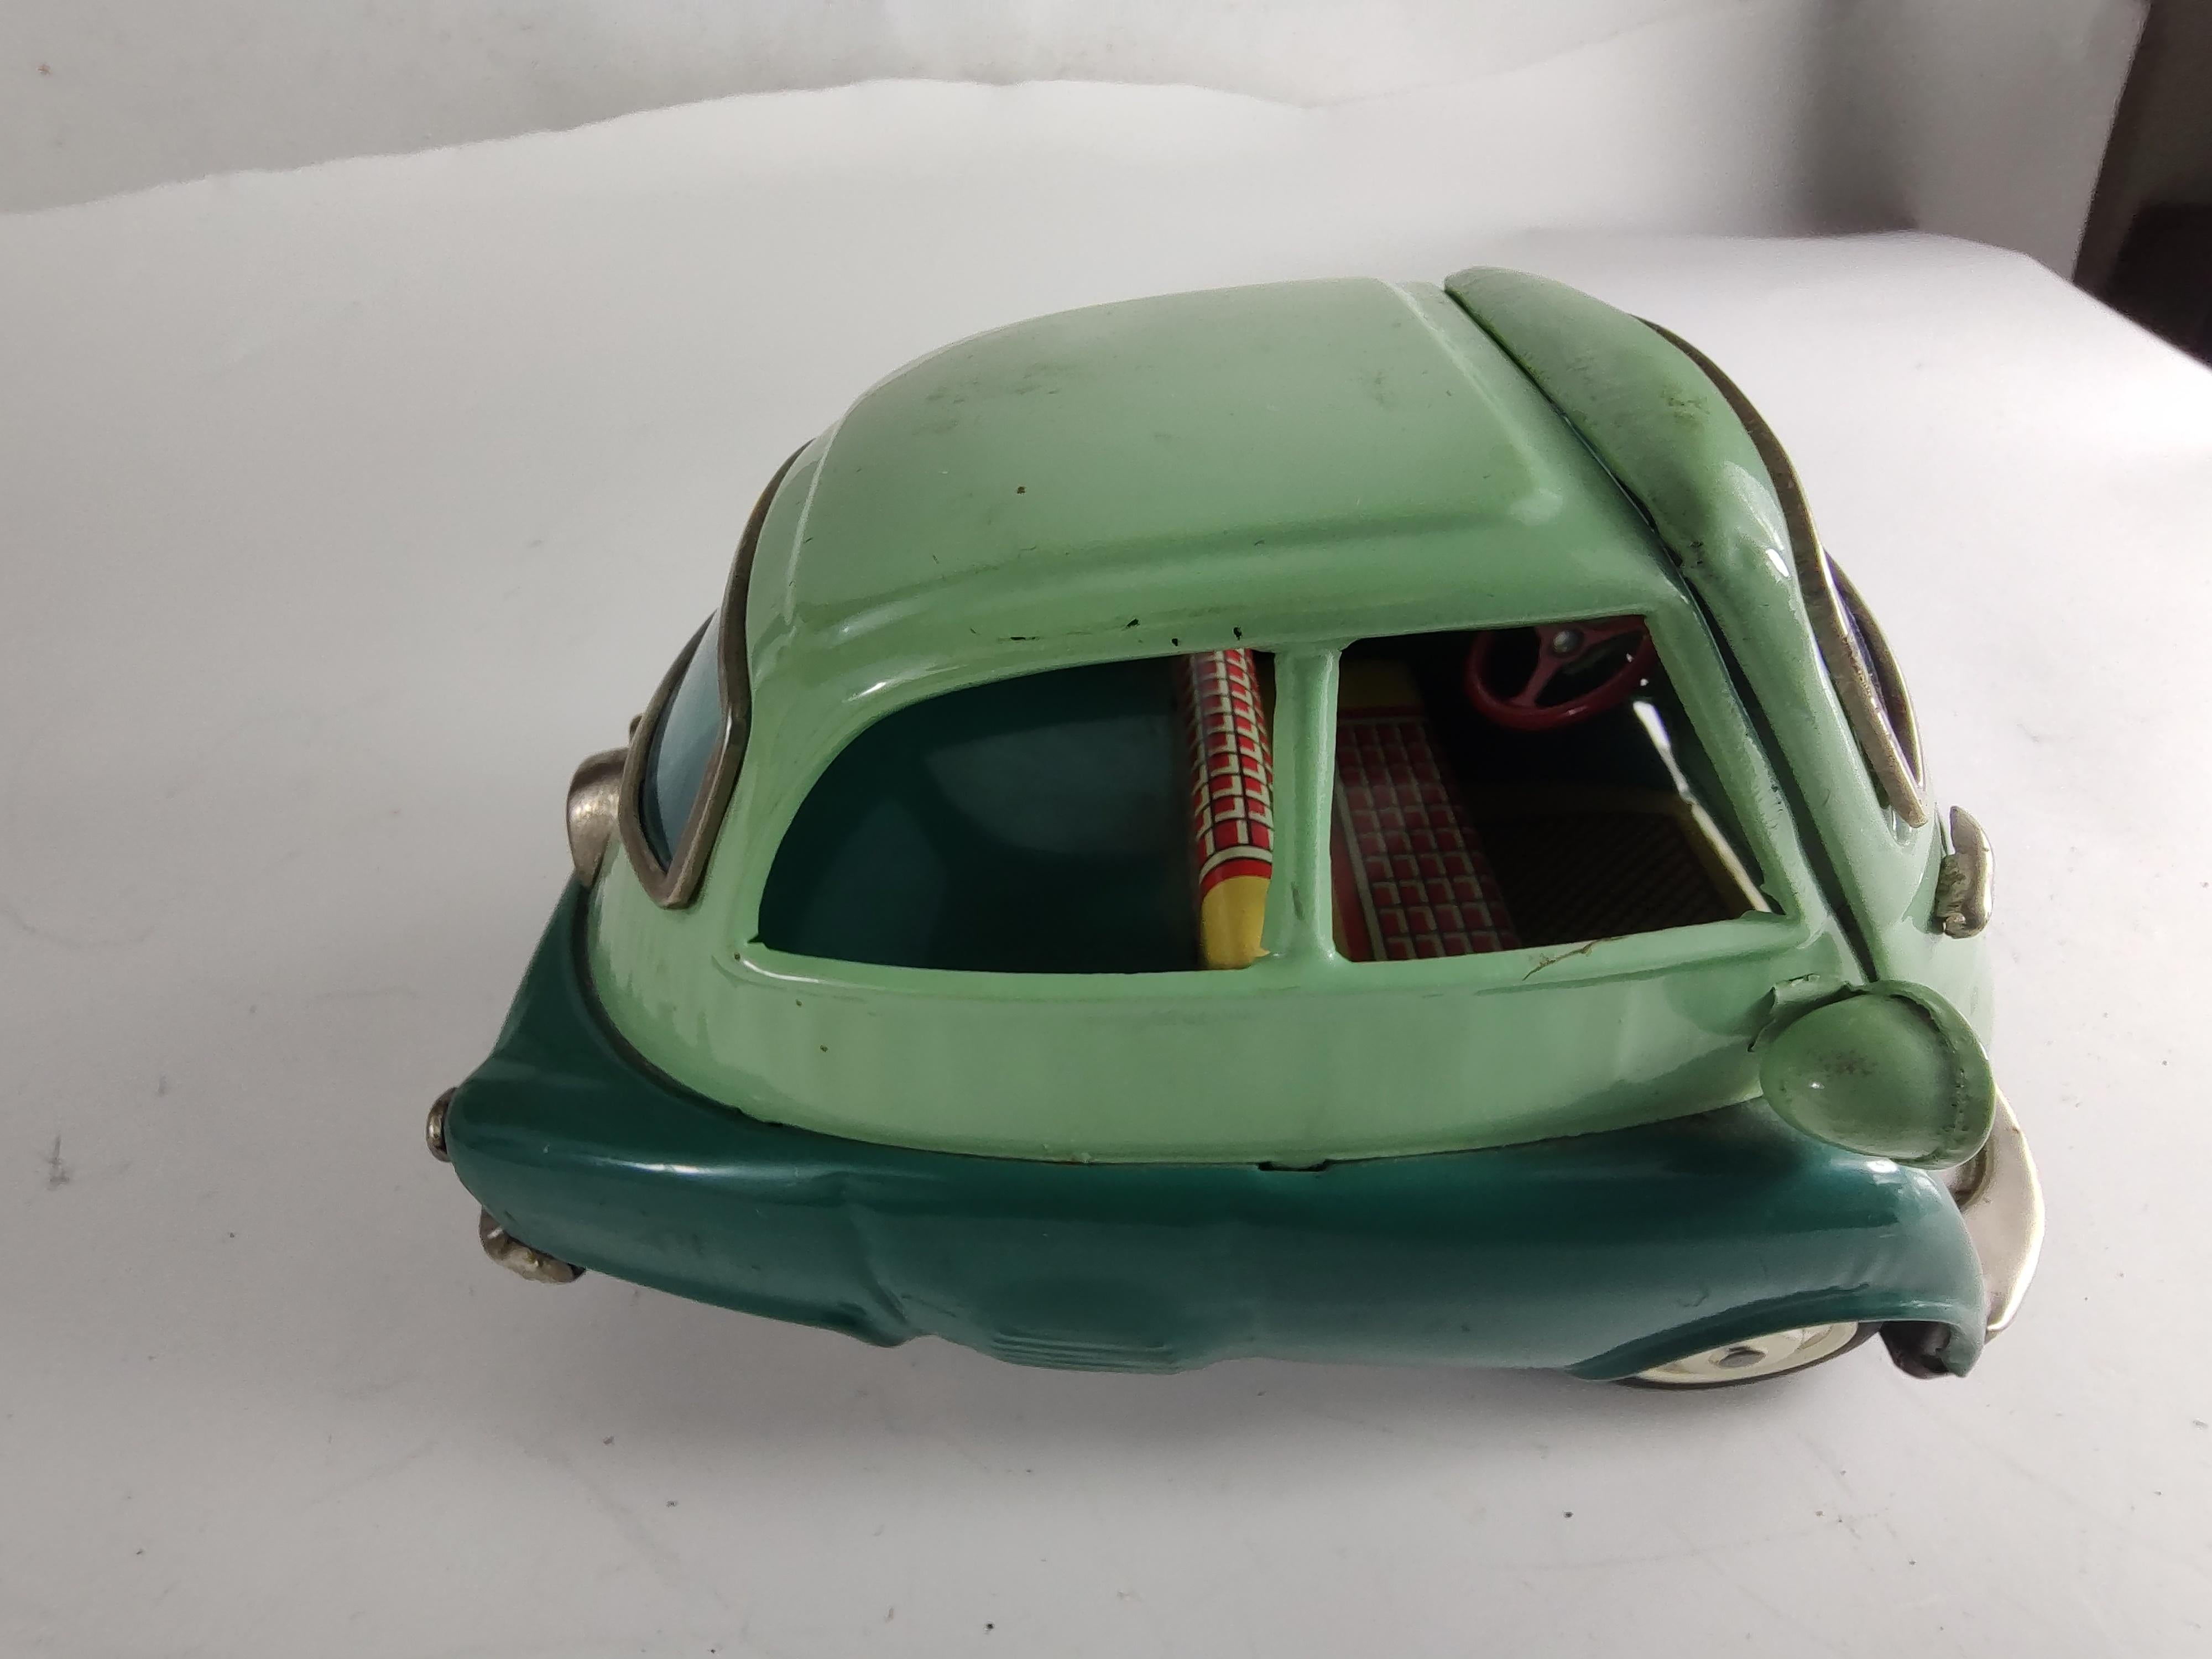 Hand-Crafted Midcentury Tin Litho Friction Toy Car by Bandai Japan BMW Isetta